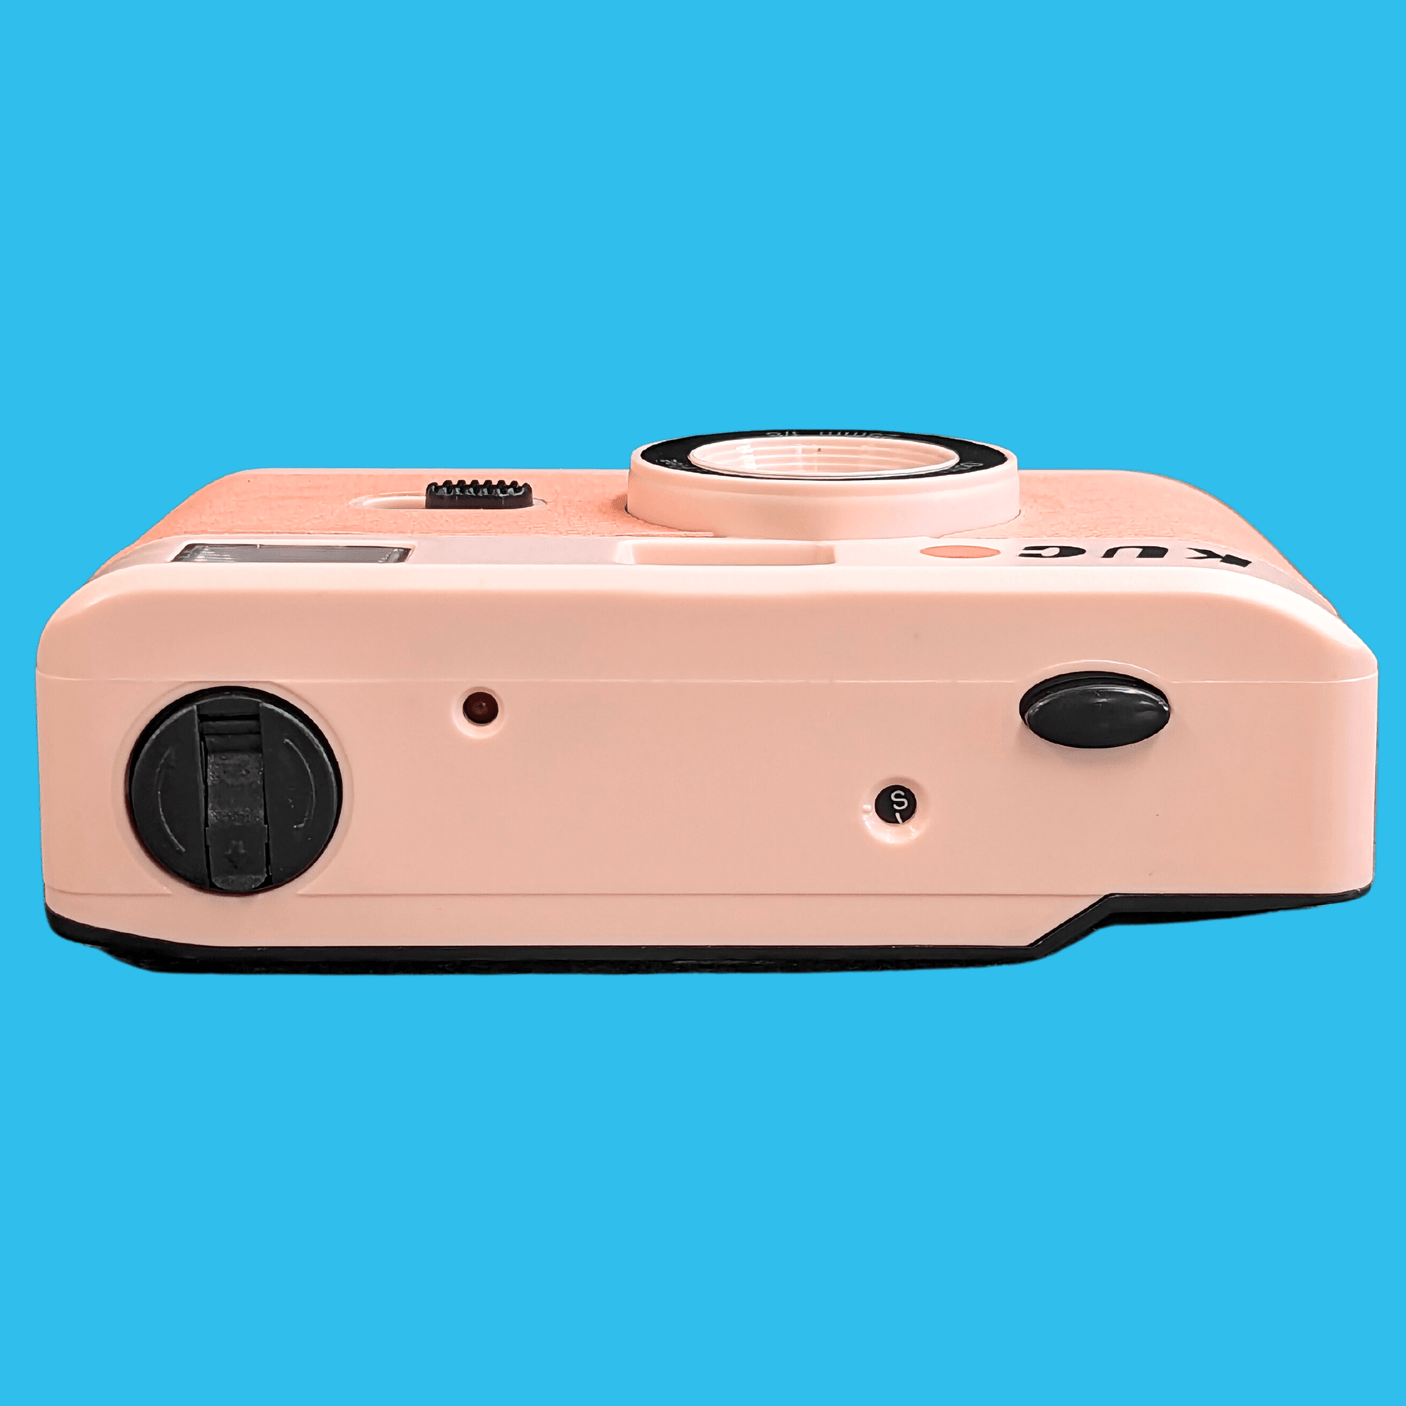 Brand New KUGO 35mm Film Camera Reusable Point And Shoot - Pink